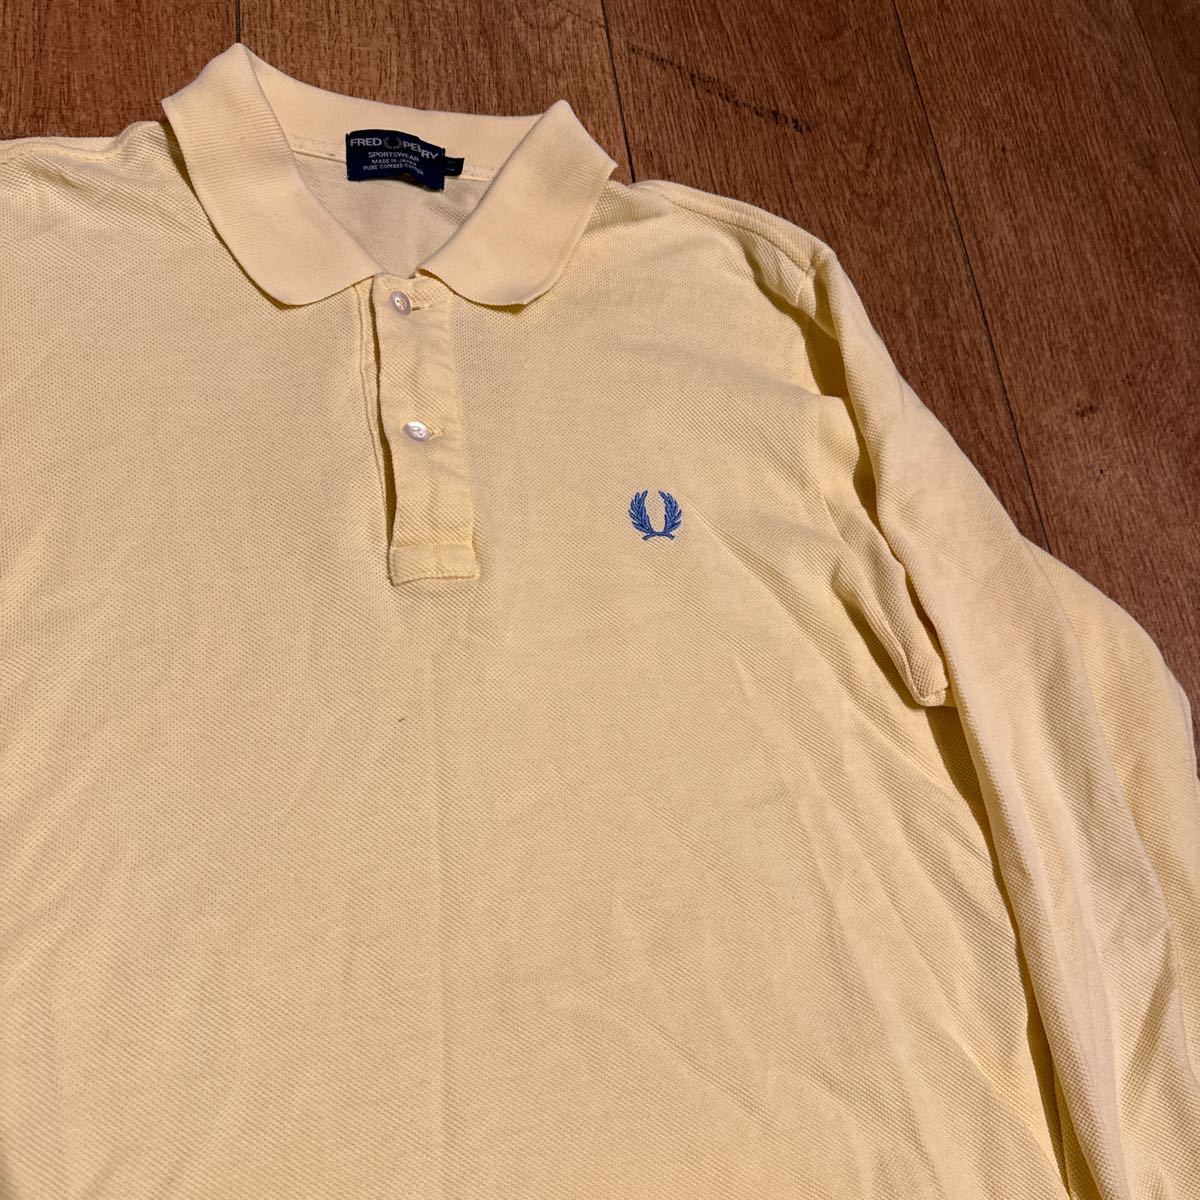 FRED PERRY 長袖ポロシャツ SIZE M_画像3